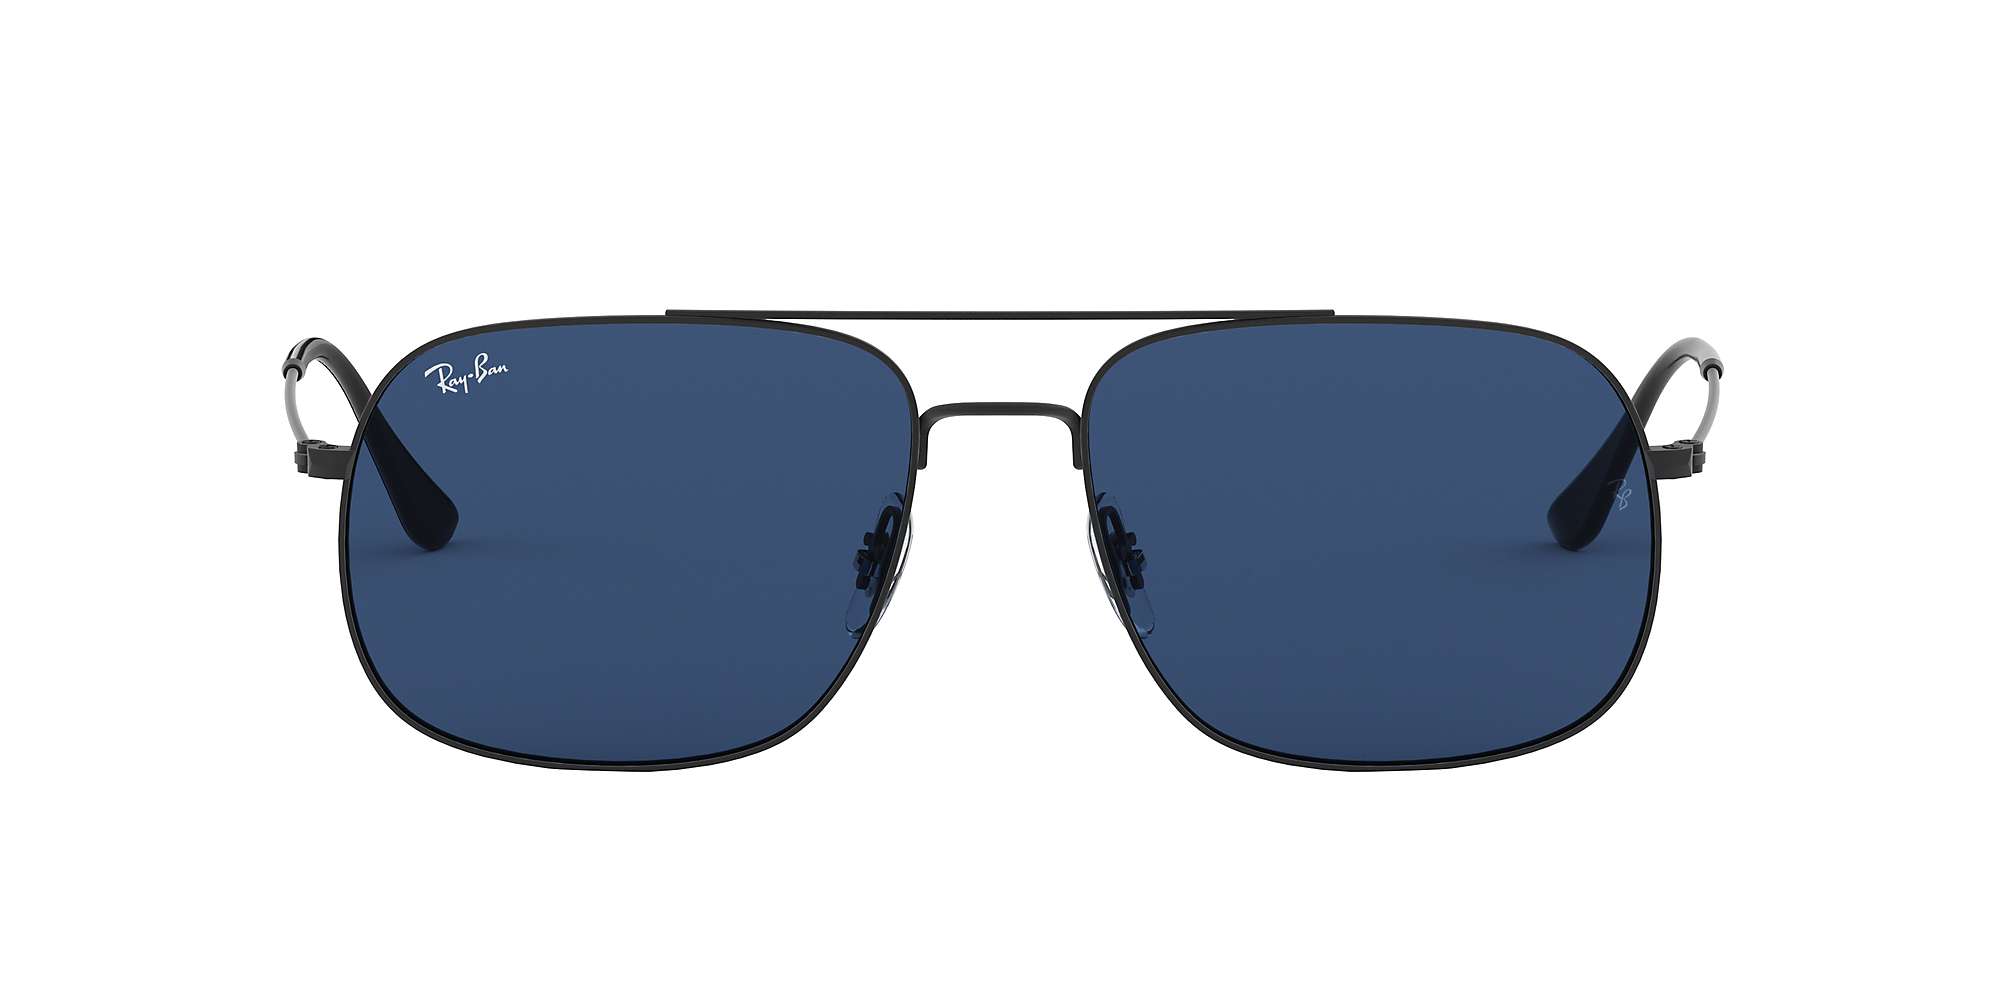 Buy Ray-Ban RB3595 Unisex Andrea Square Sunglasses Online at johnlewis.com